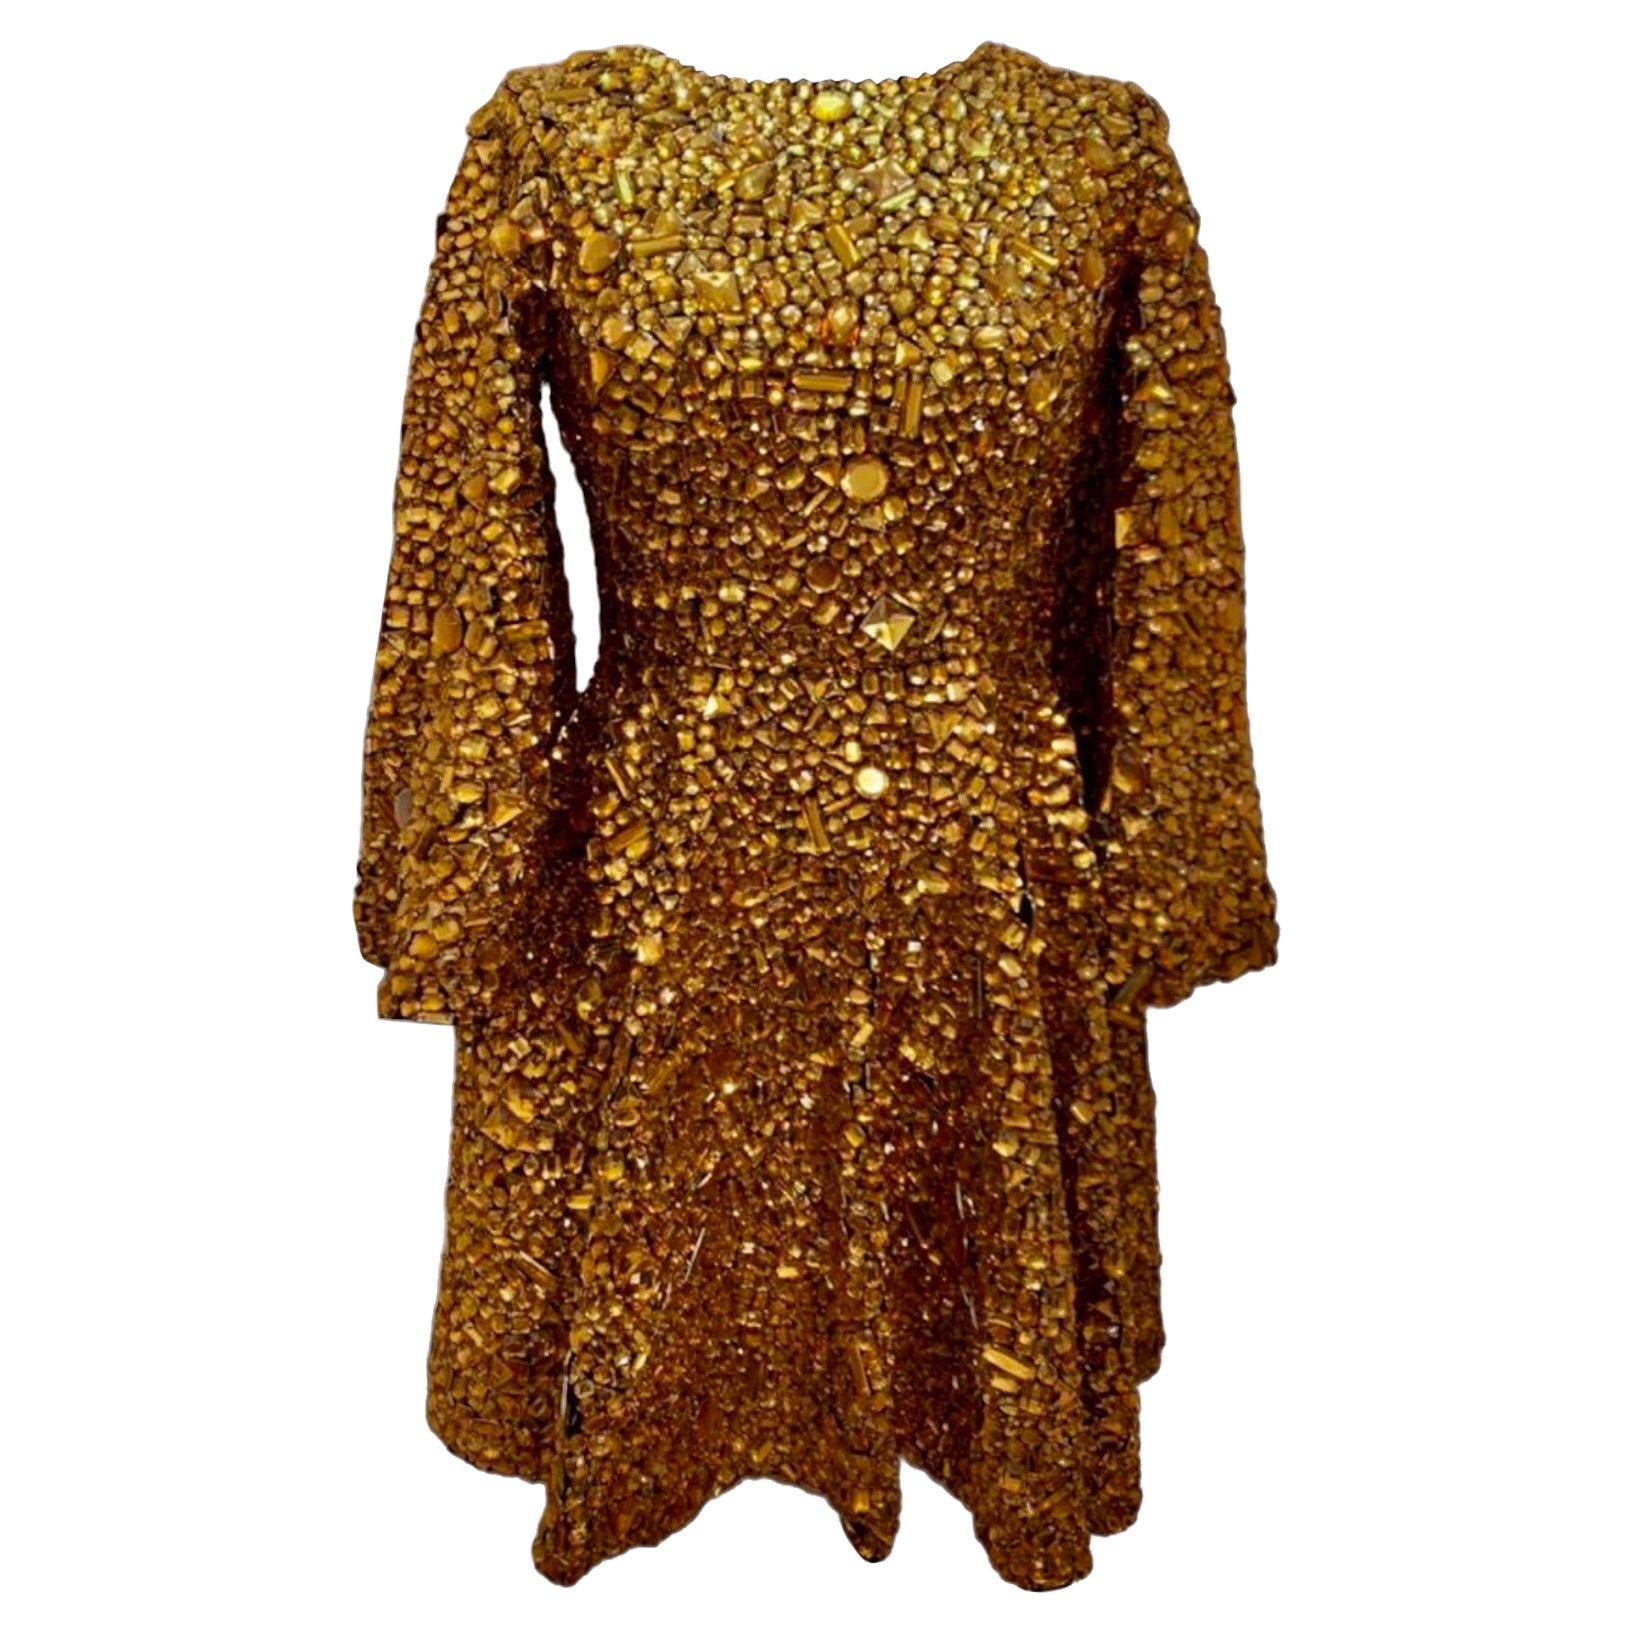 2014 Dolce & Gabbana Couture Limited Edition Crystal Embellished Dress